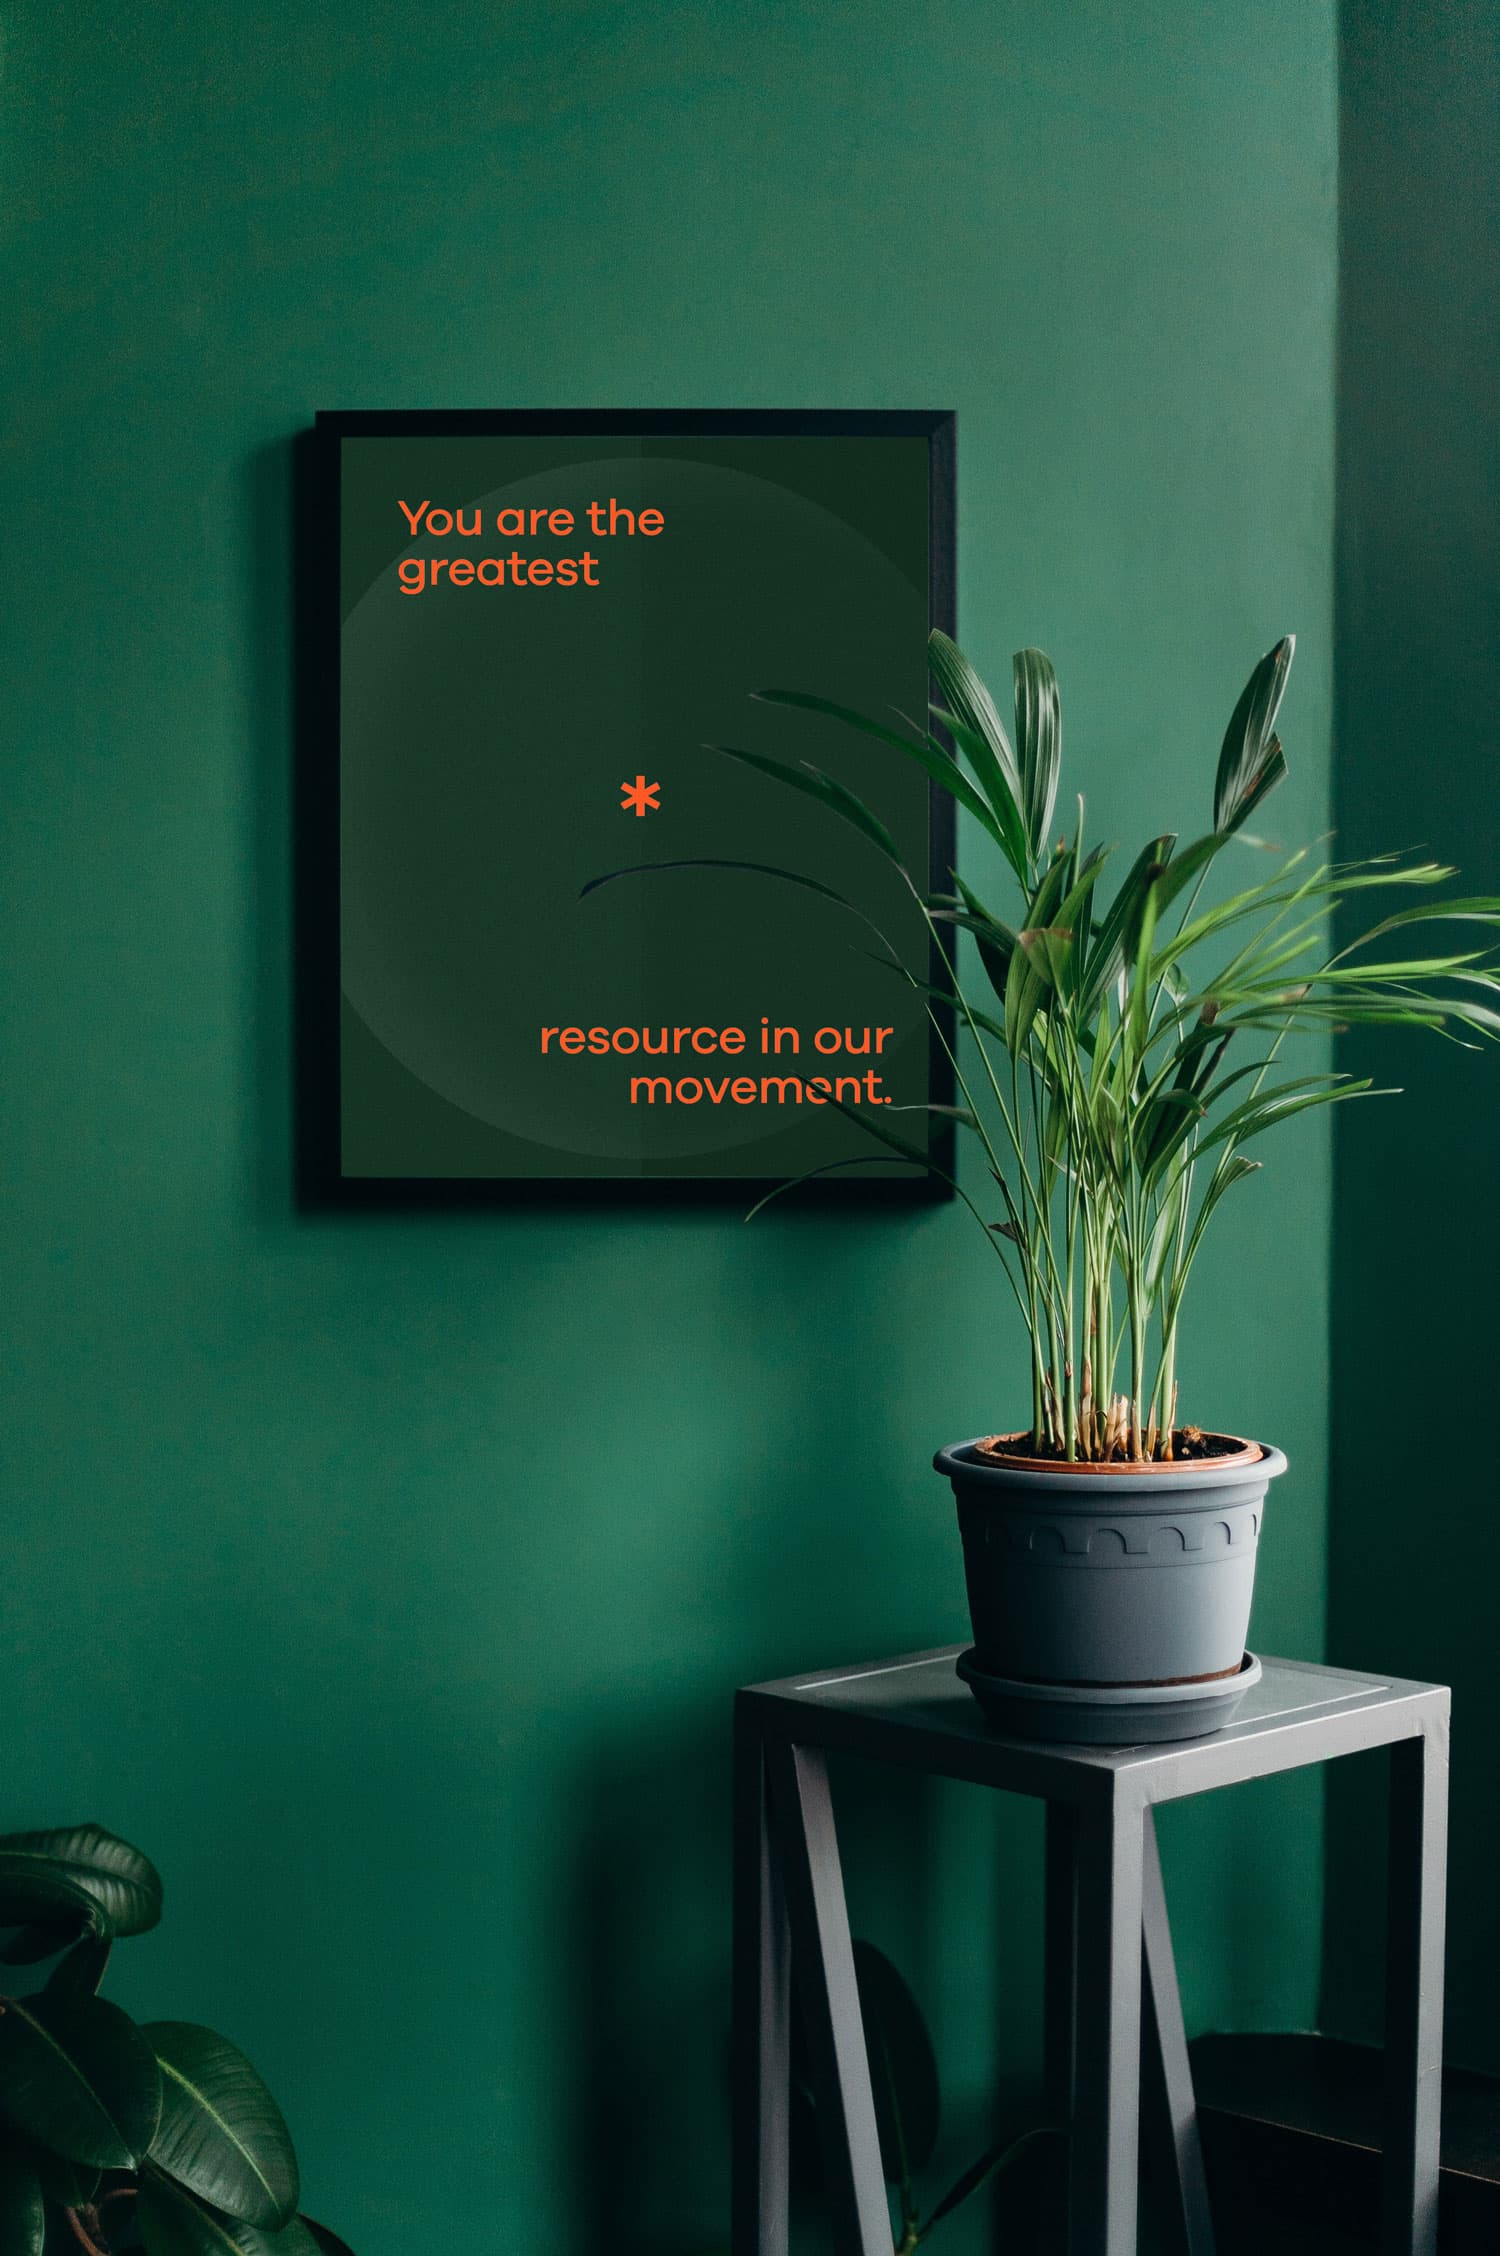 Framed poster design hanging on a green wall